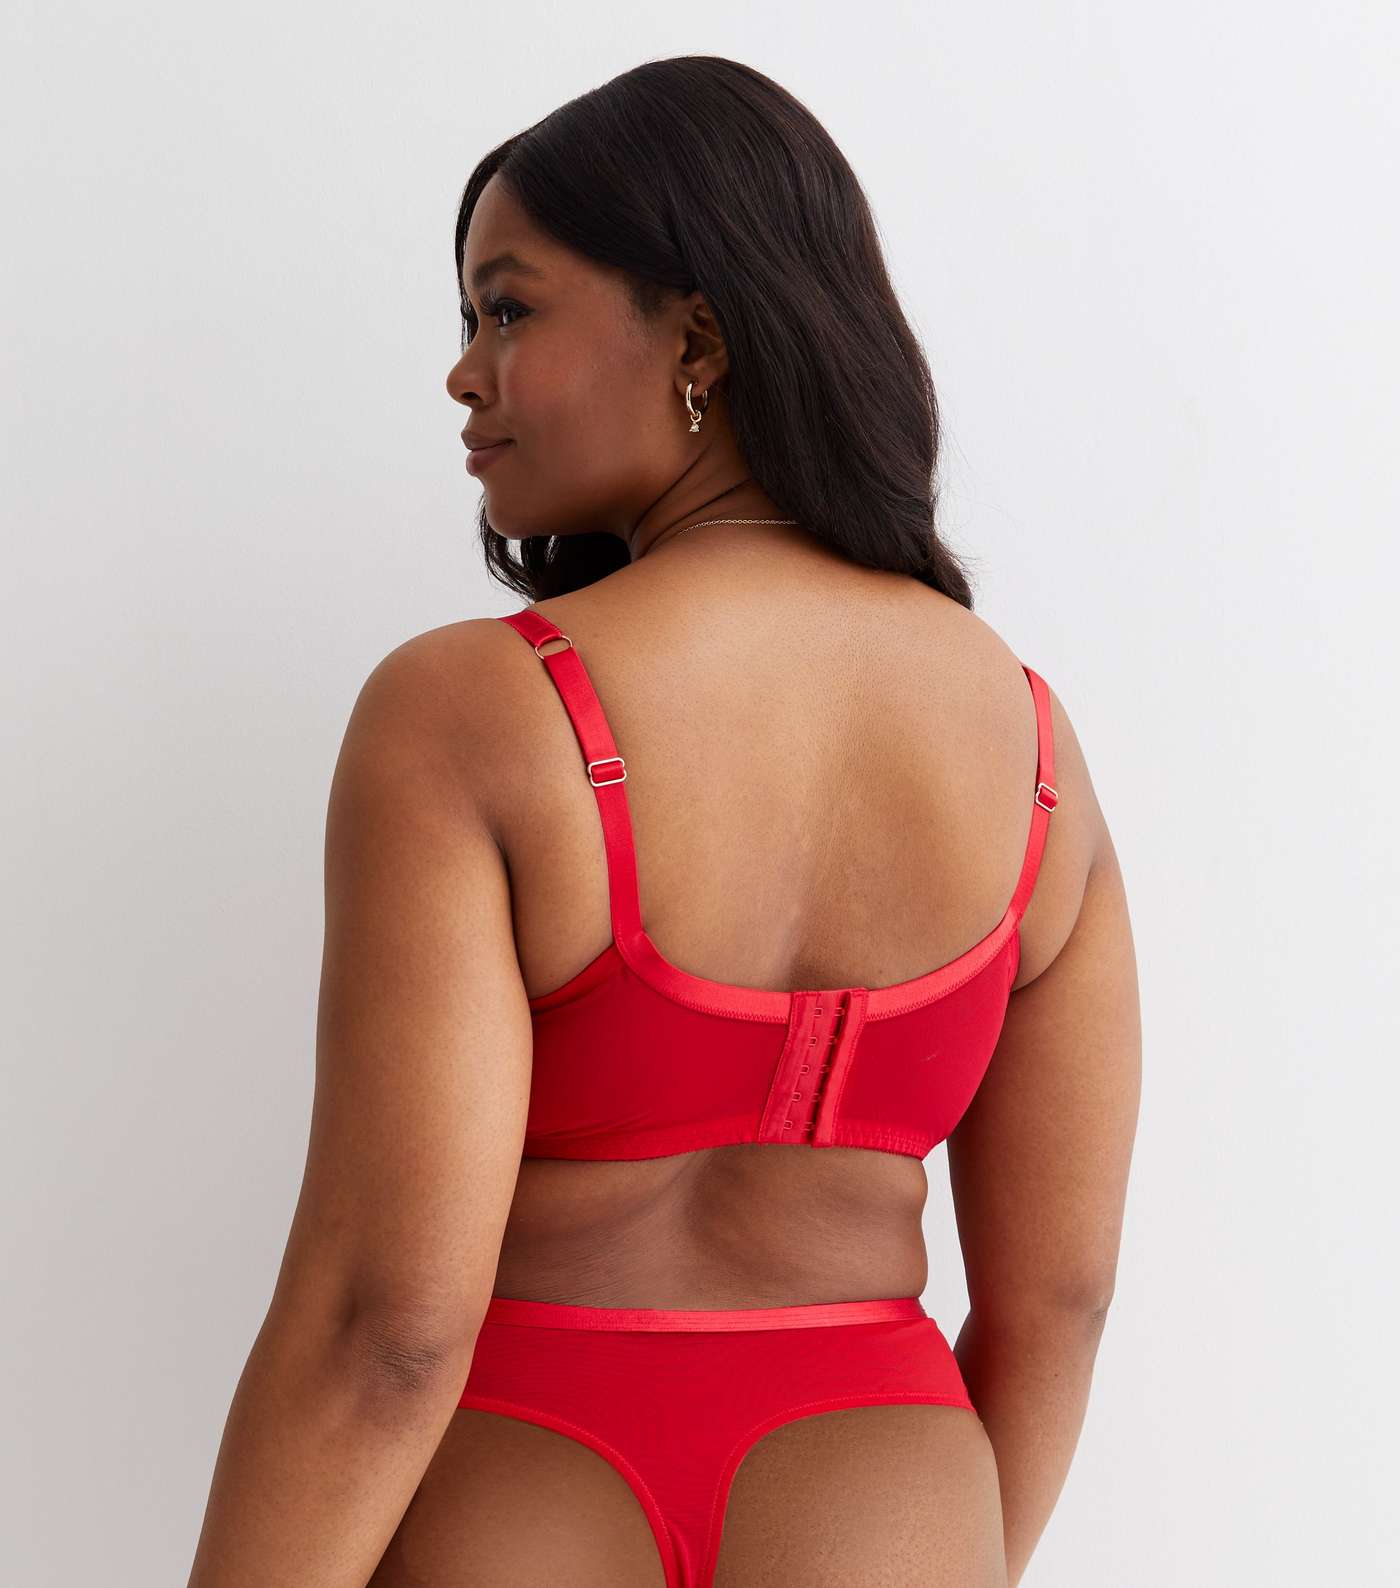 NEW Floral Lace High-Waist Thong in Red